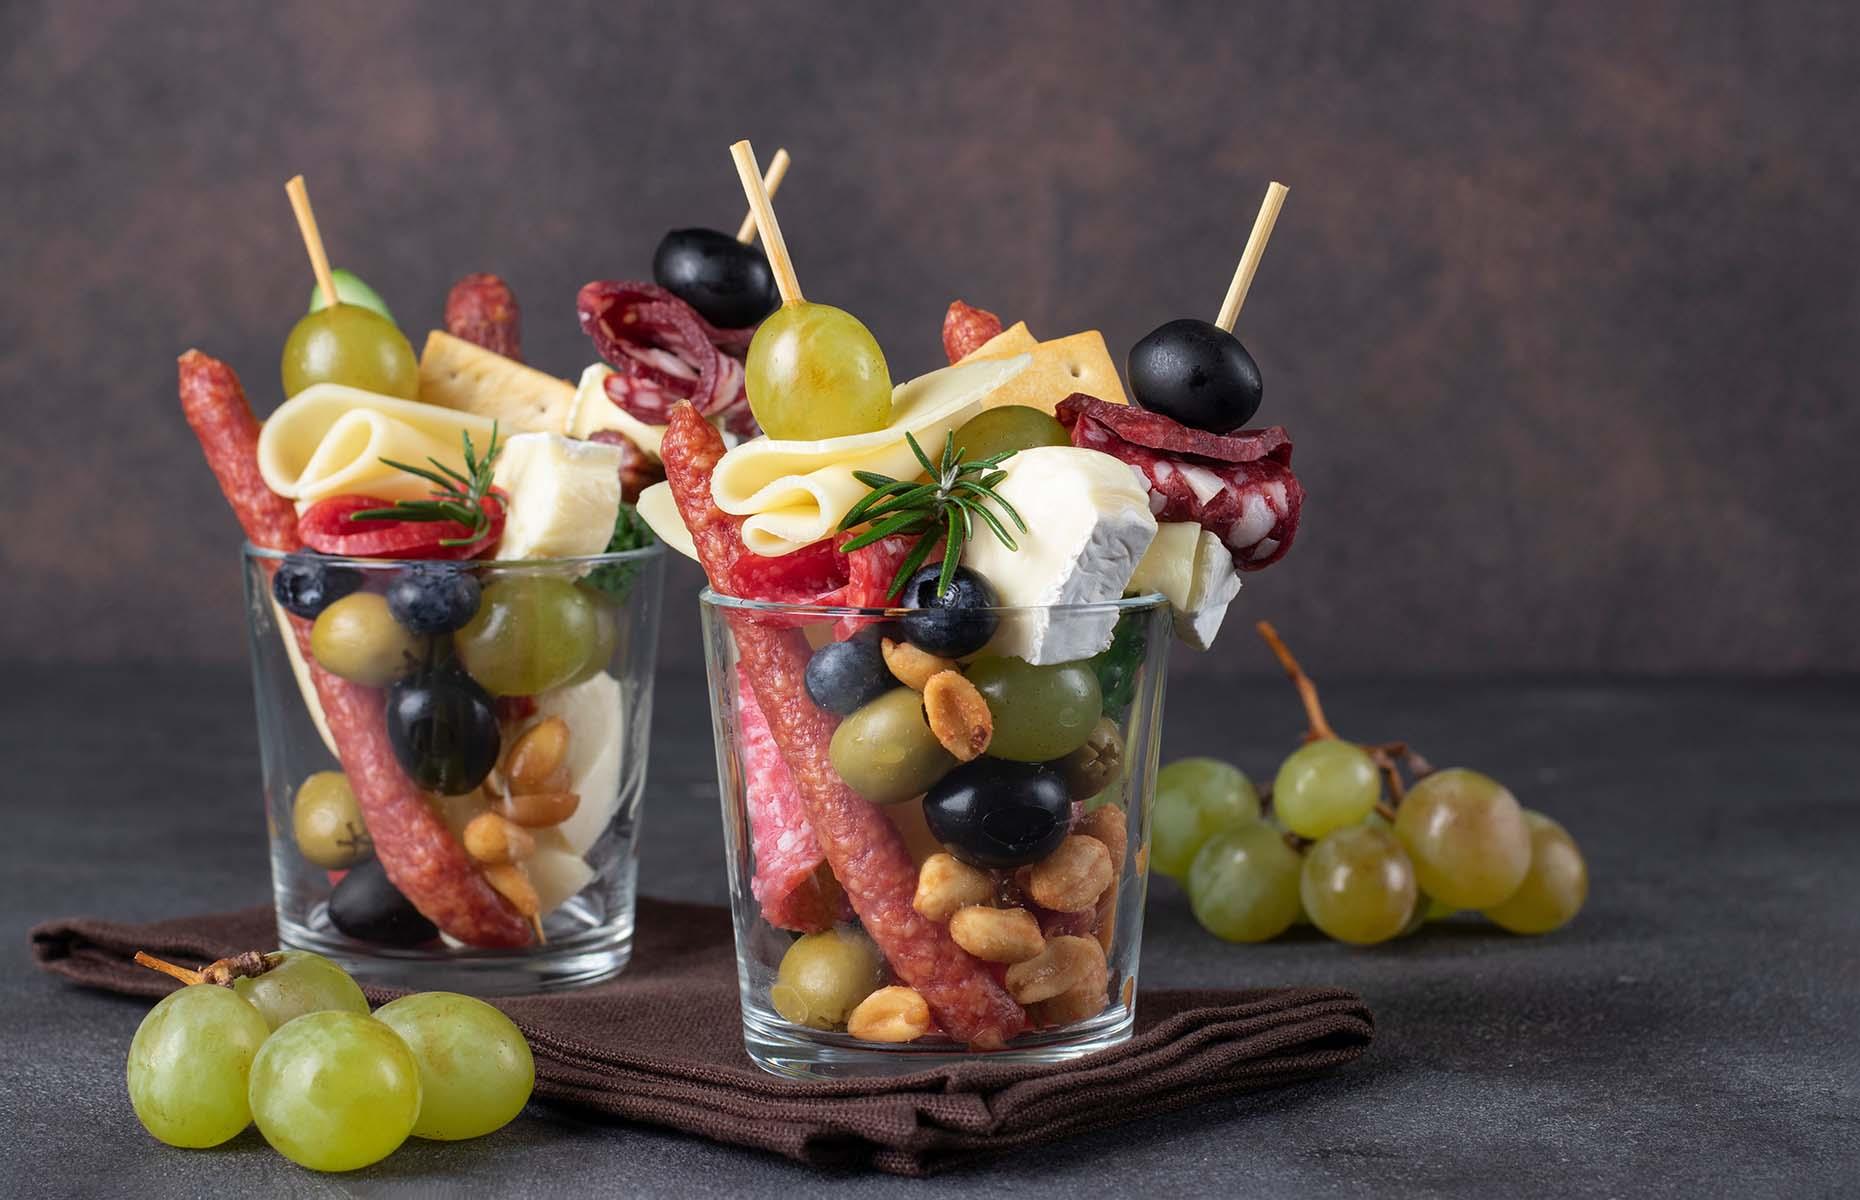 <p>Don't like the idea of everyone dipping (or worse, double-dipping) into the same food? Swap your sharing board for another foodie trend: jarcuterie. With individual servings presented in glasses or jars, every guest will get their own mini-selection of meats and toppings.</p>  <p><a href="https://www.lovefood.com/news/119757/edible-gifts-you-can-make-and-mail-edible-gifts-to-post"><strong>Now get inspired by these edible gifts you can make and mail</strong></a></p>